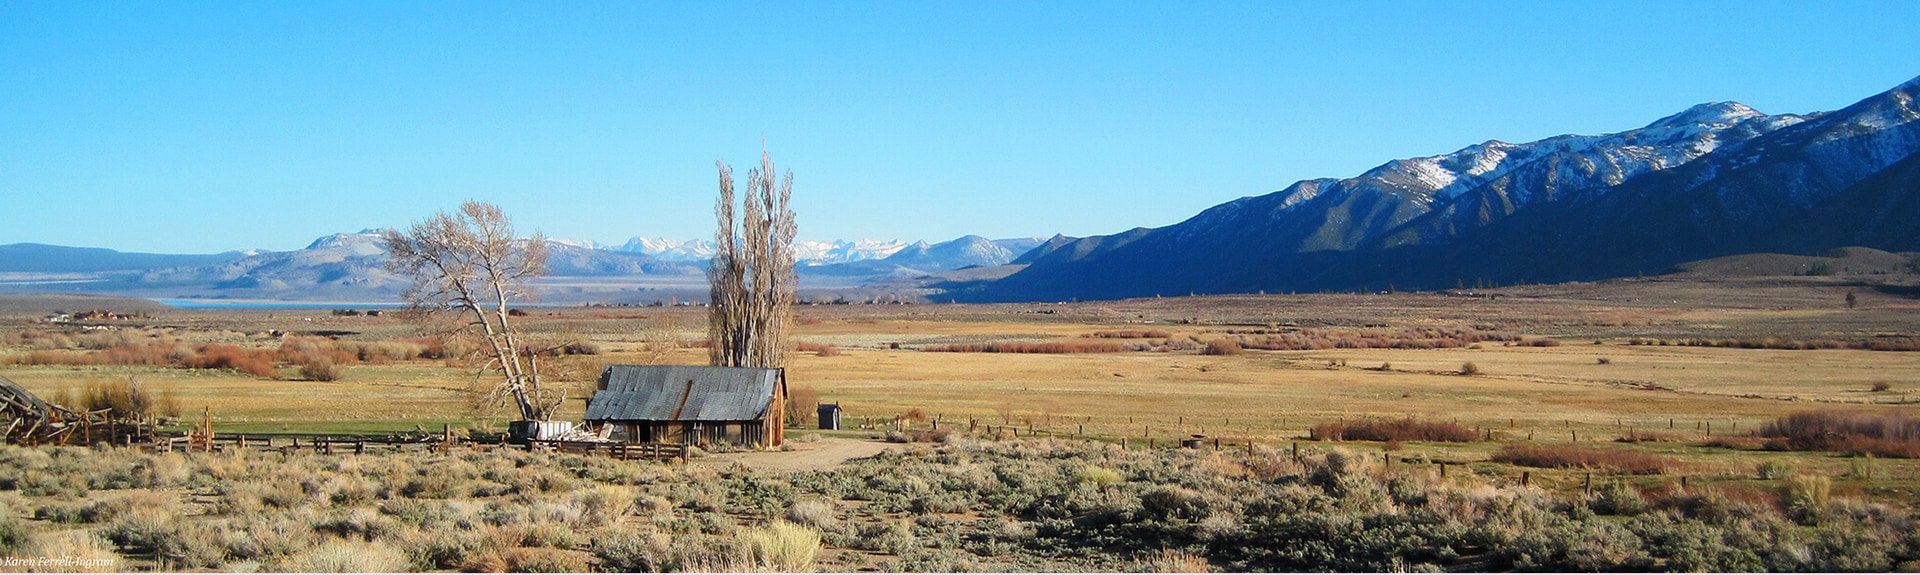 Image of Conway Ranch - land that was protected using a conservation easement